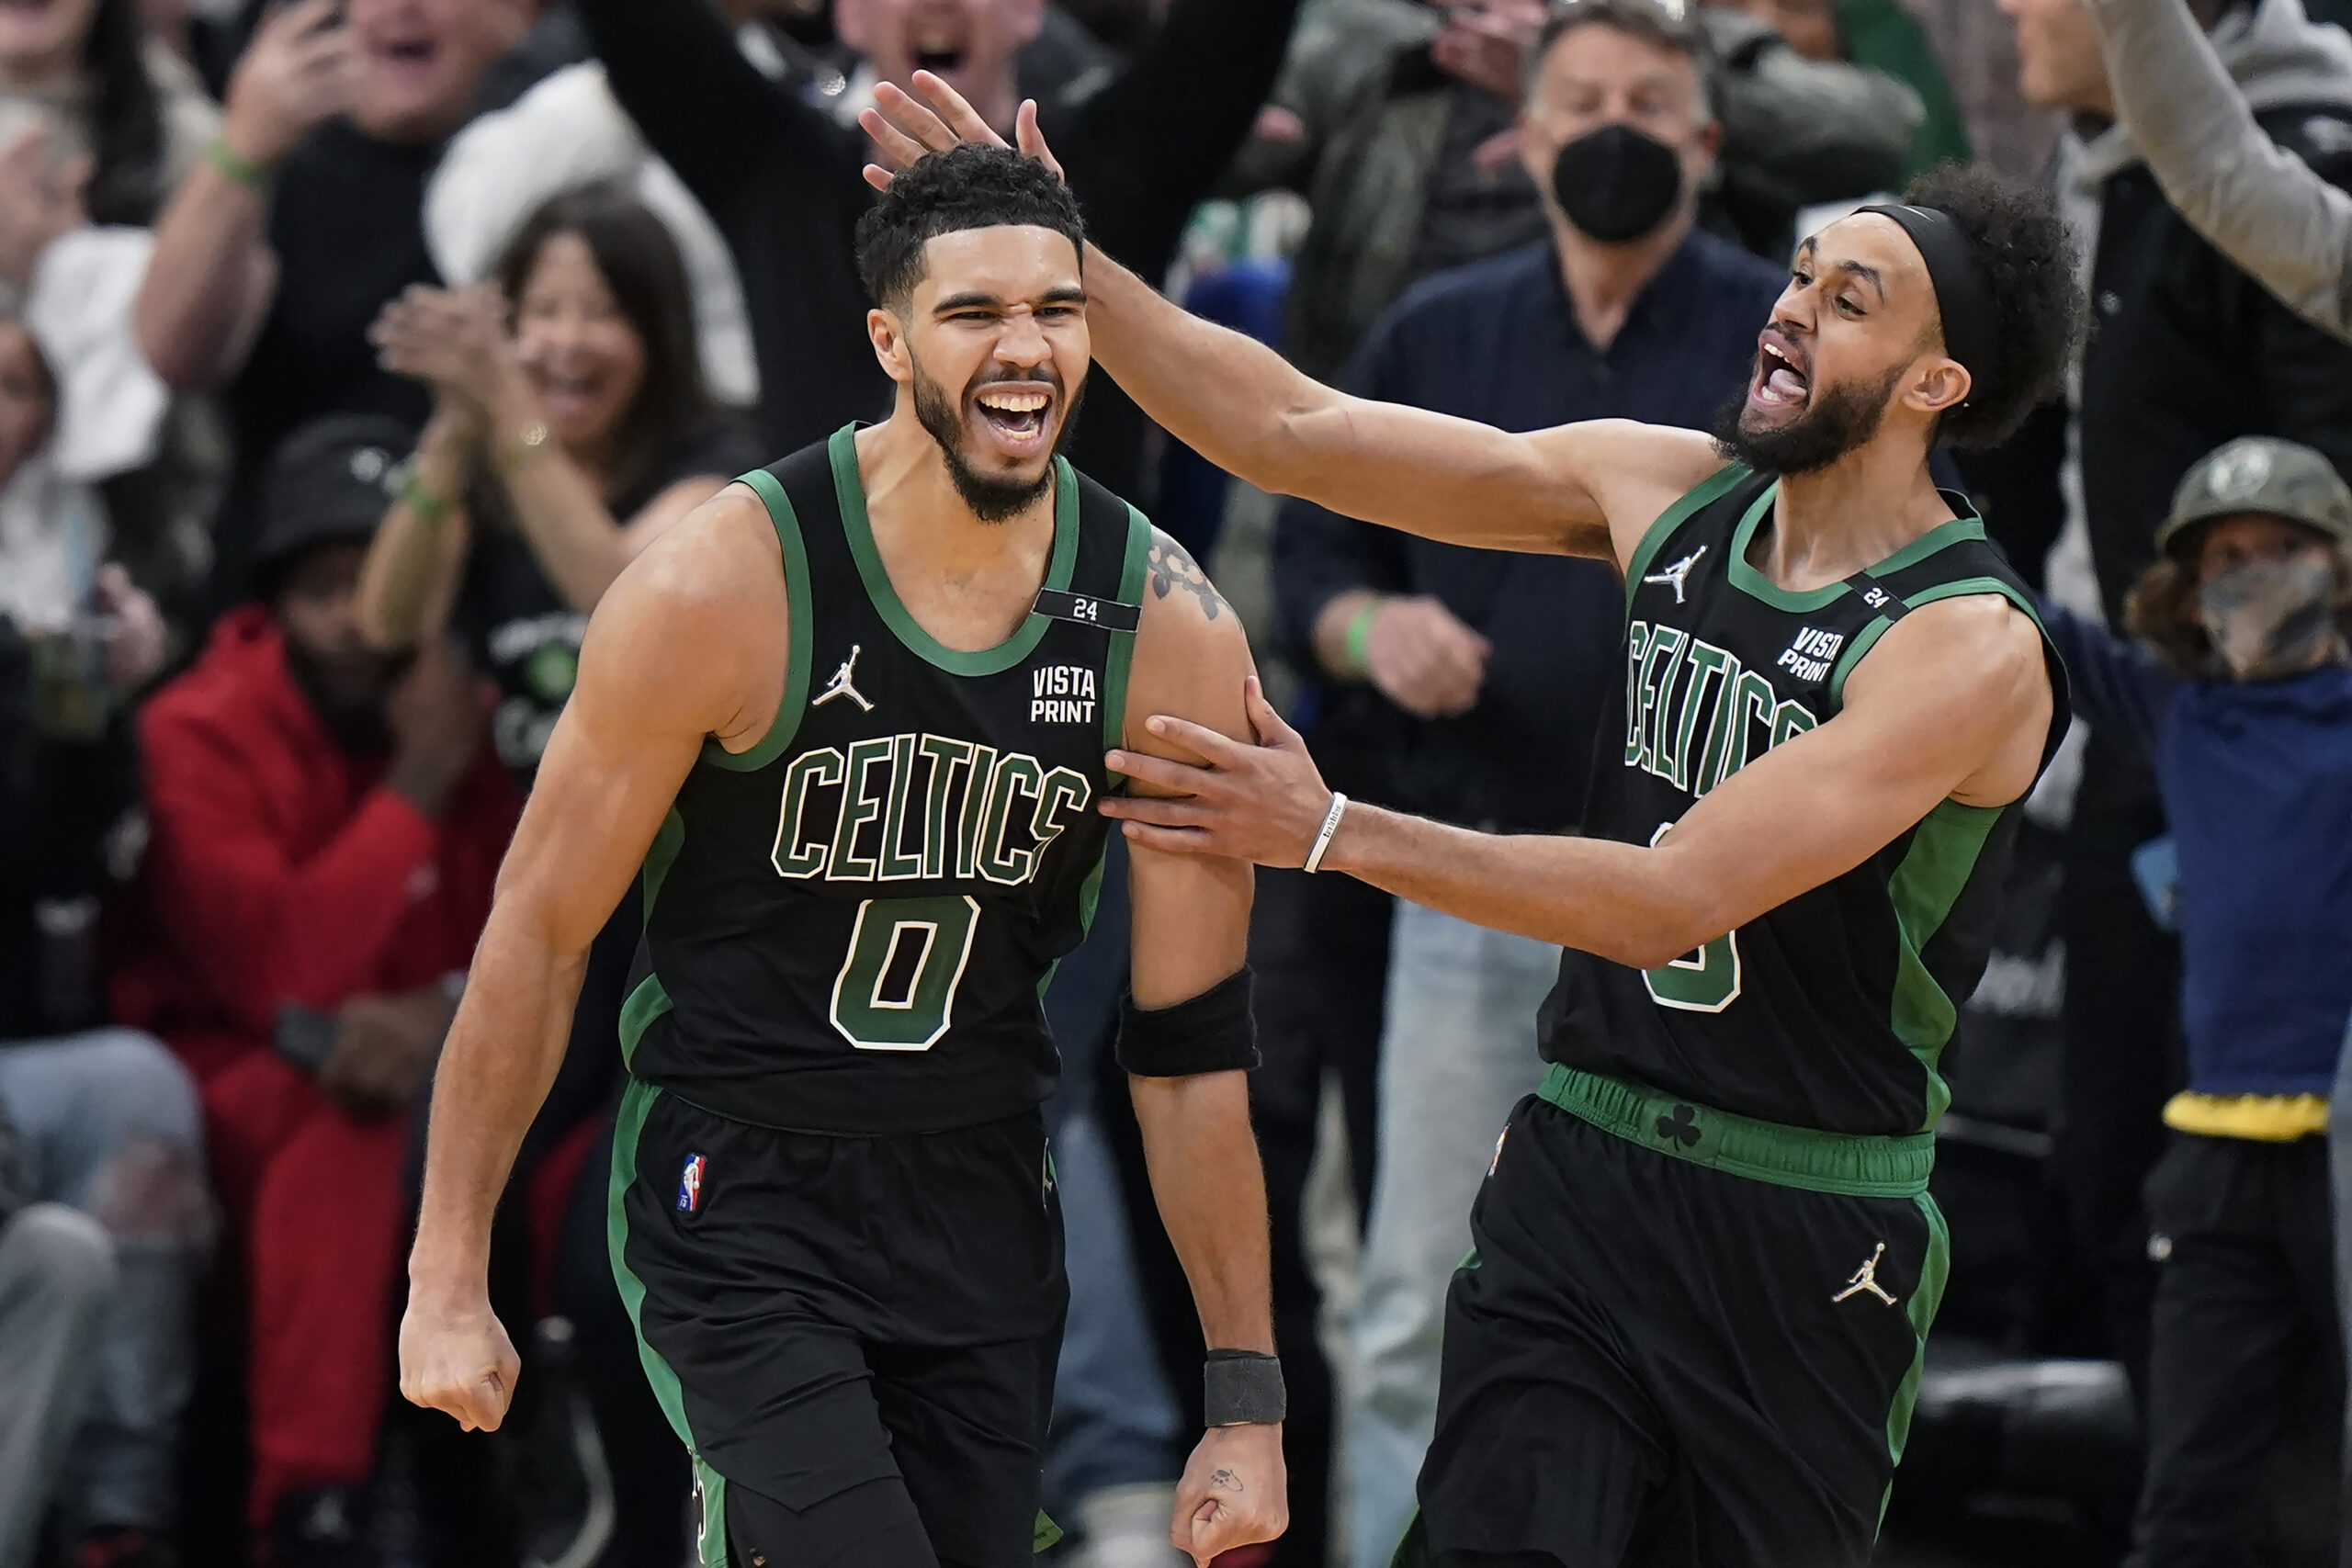 ‘We’re watching a true superstar blossom in front of us,’ says Bulls champ BJ Armstrong of Jayson Tatum